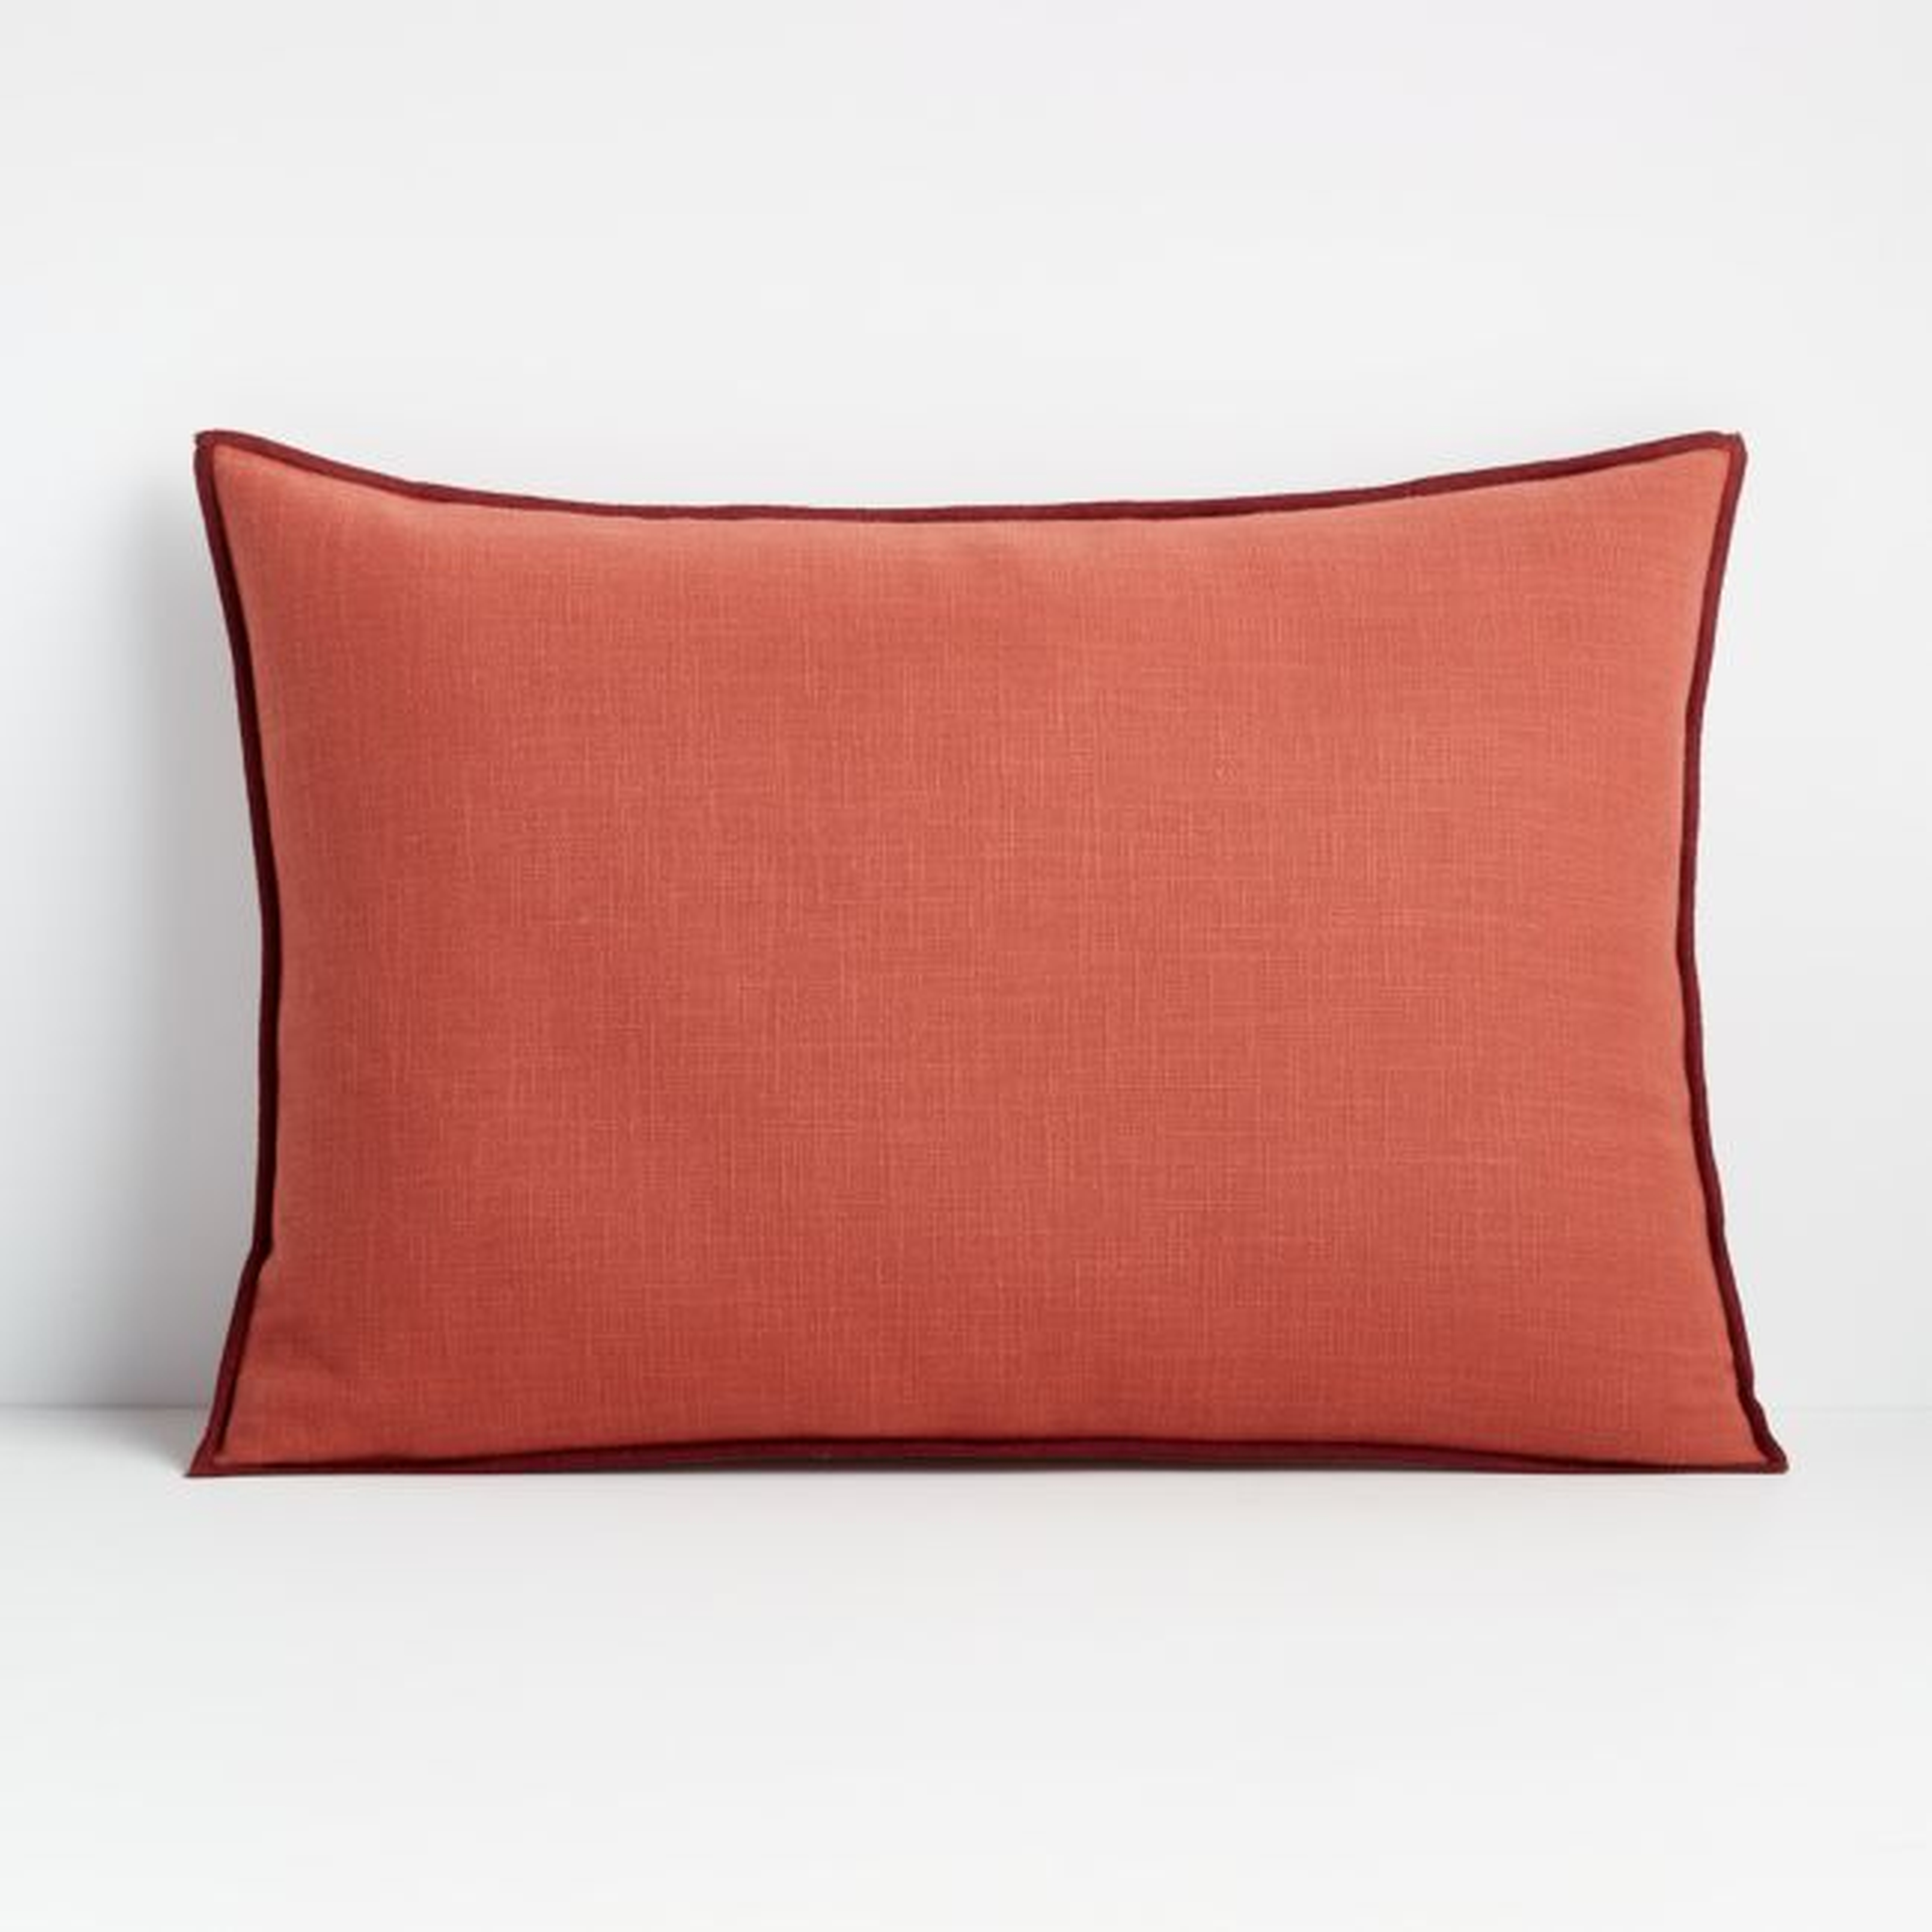 Ori Baked Clay 22"x15" Pillow with Feather-Down Insert - Crate and Barrel